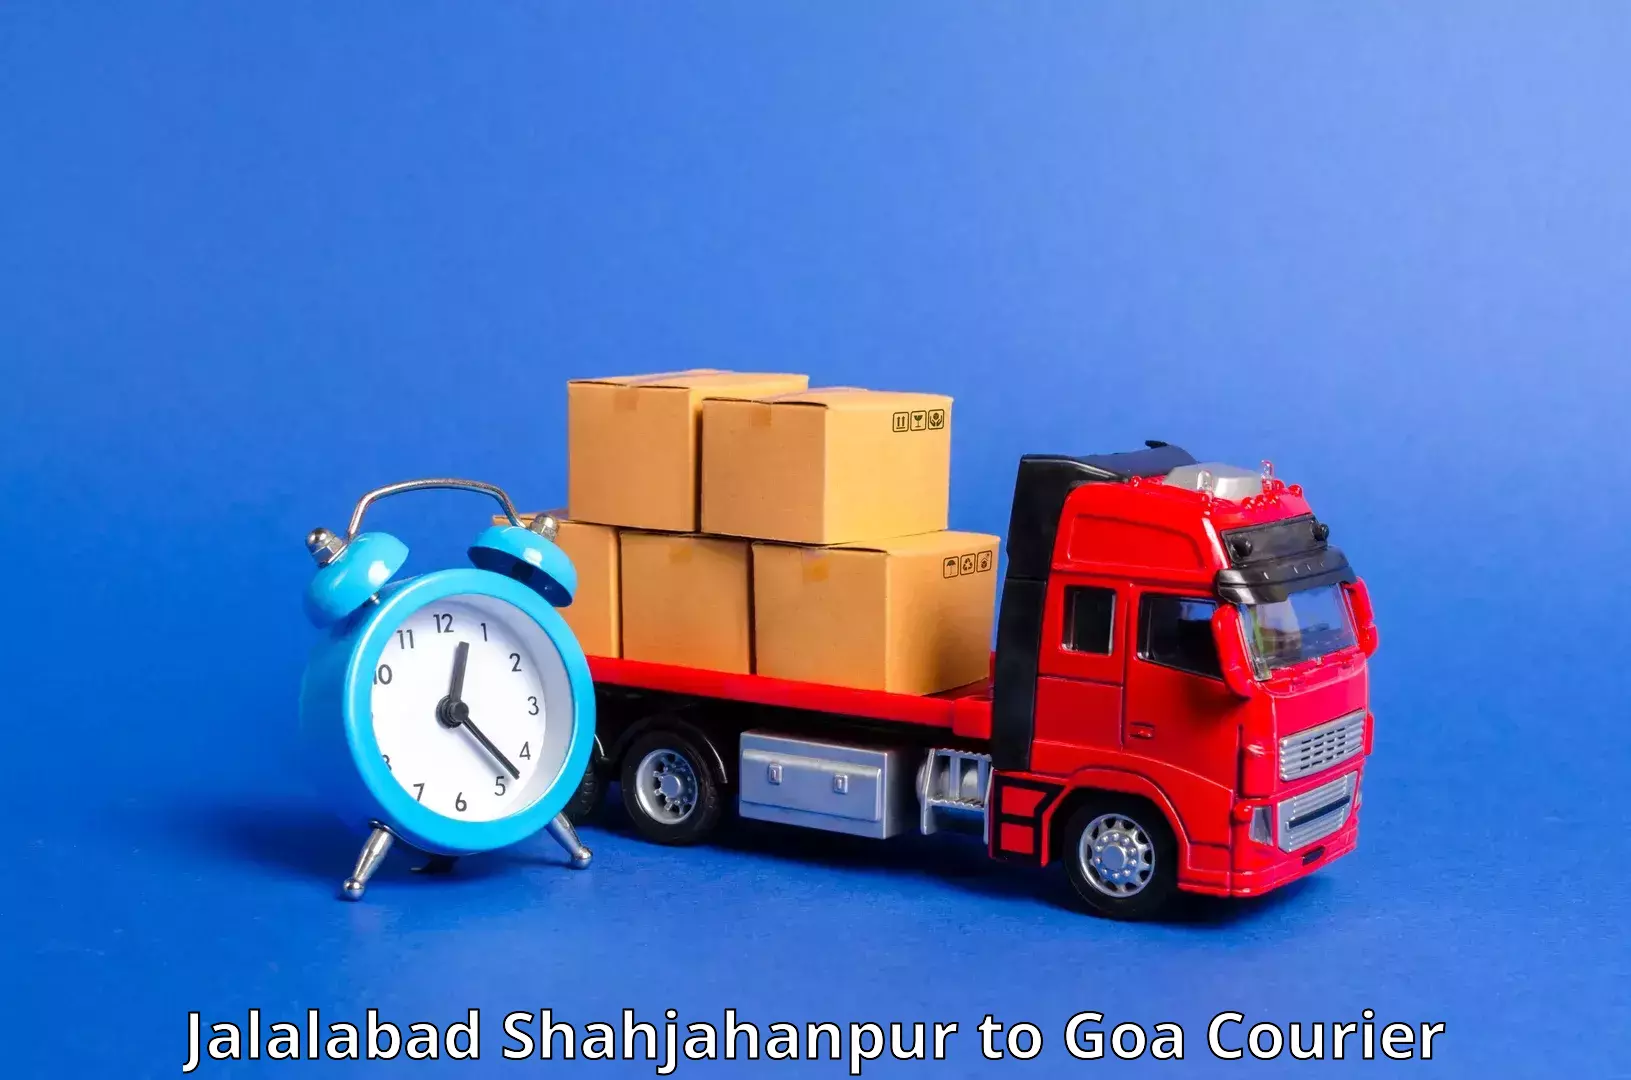 Reliable courier services Jalalabad Shahjahanpur to Panjim